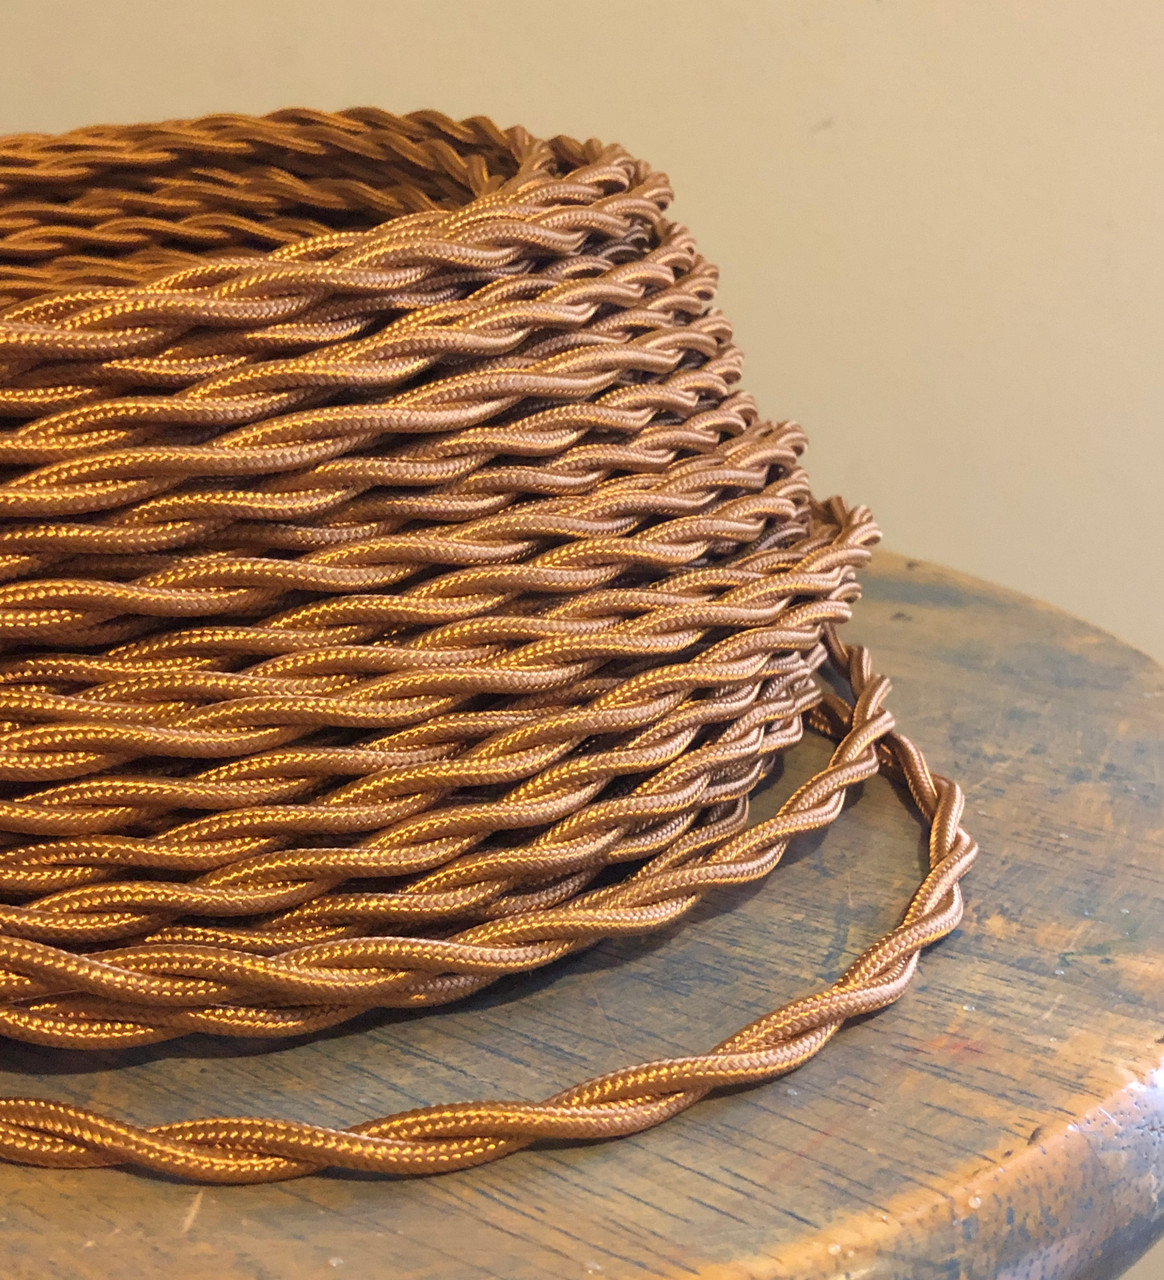 Bronze Twisted 3-Wire Cloth Covered Cord 18ga Vintage Lamp Antique Lights Rayon 